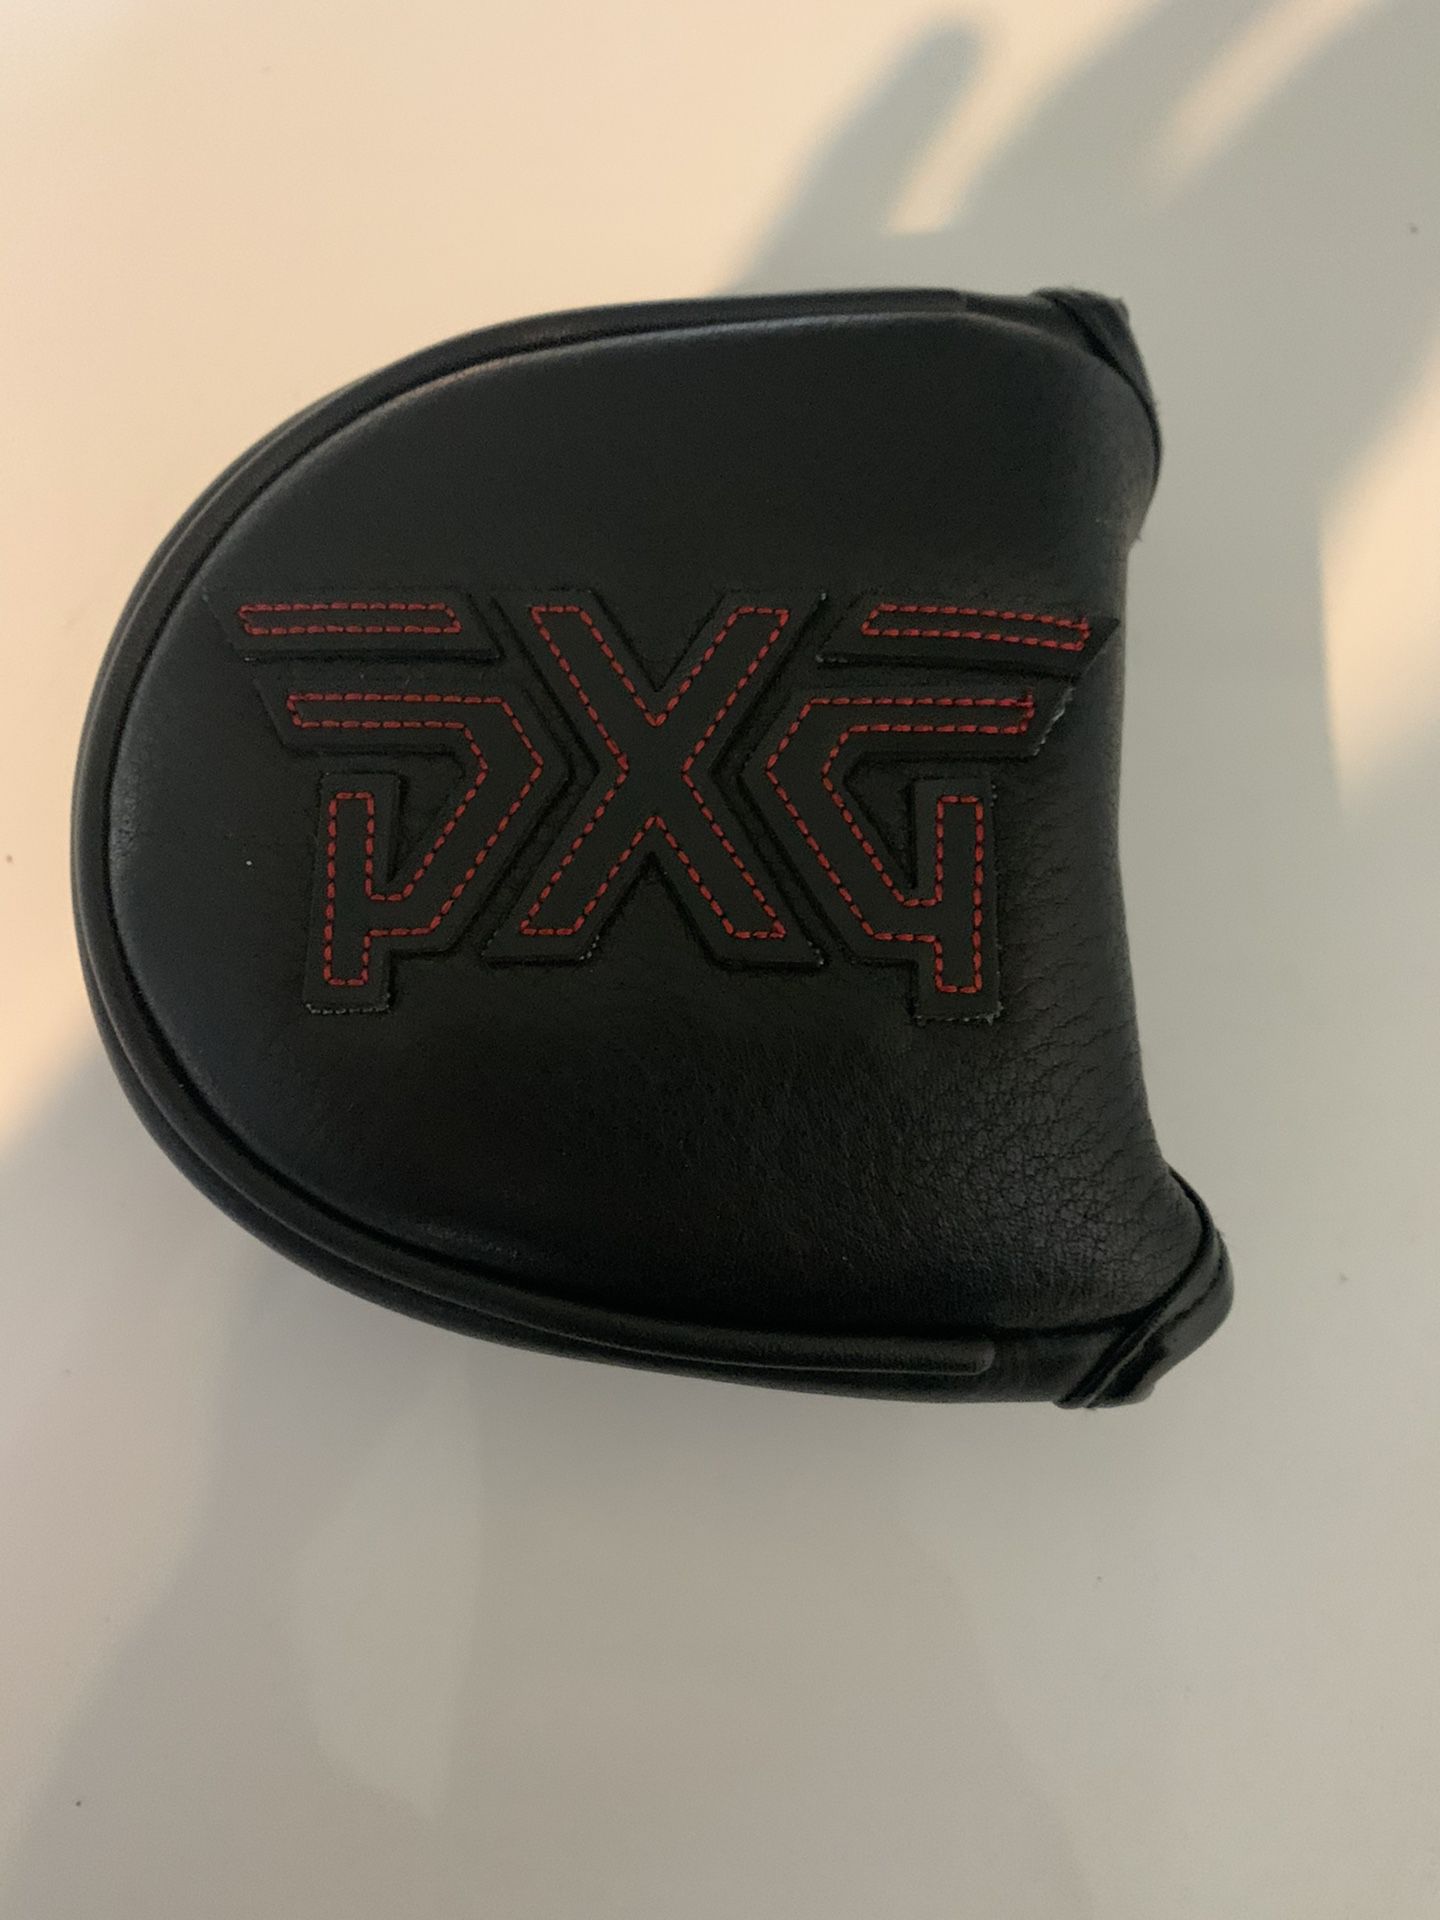 PXG Premium Leather Putter Cover